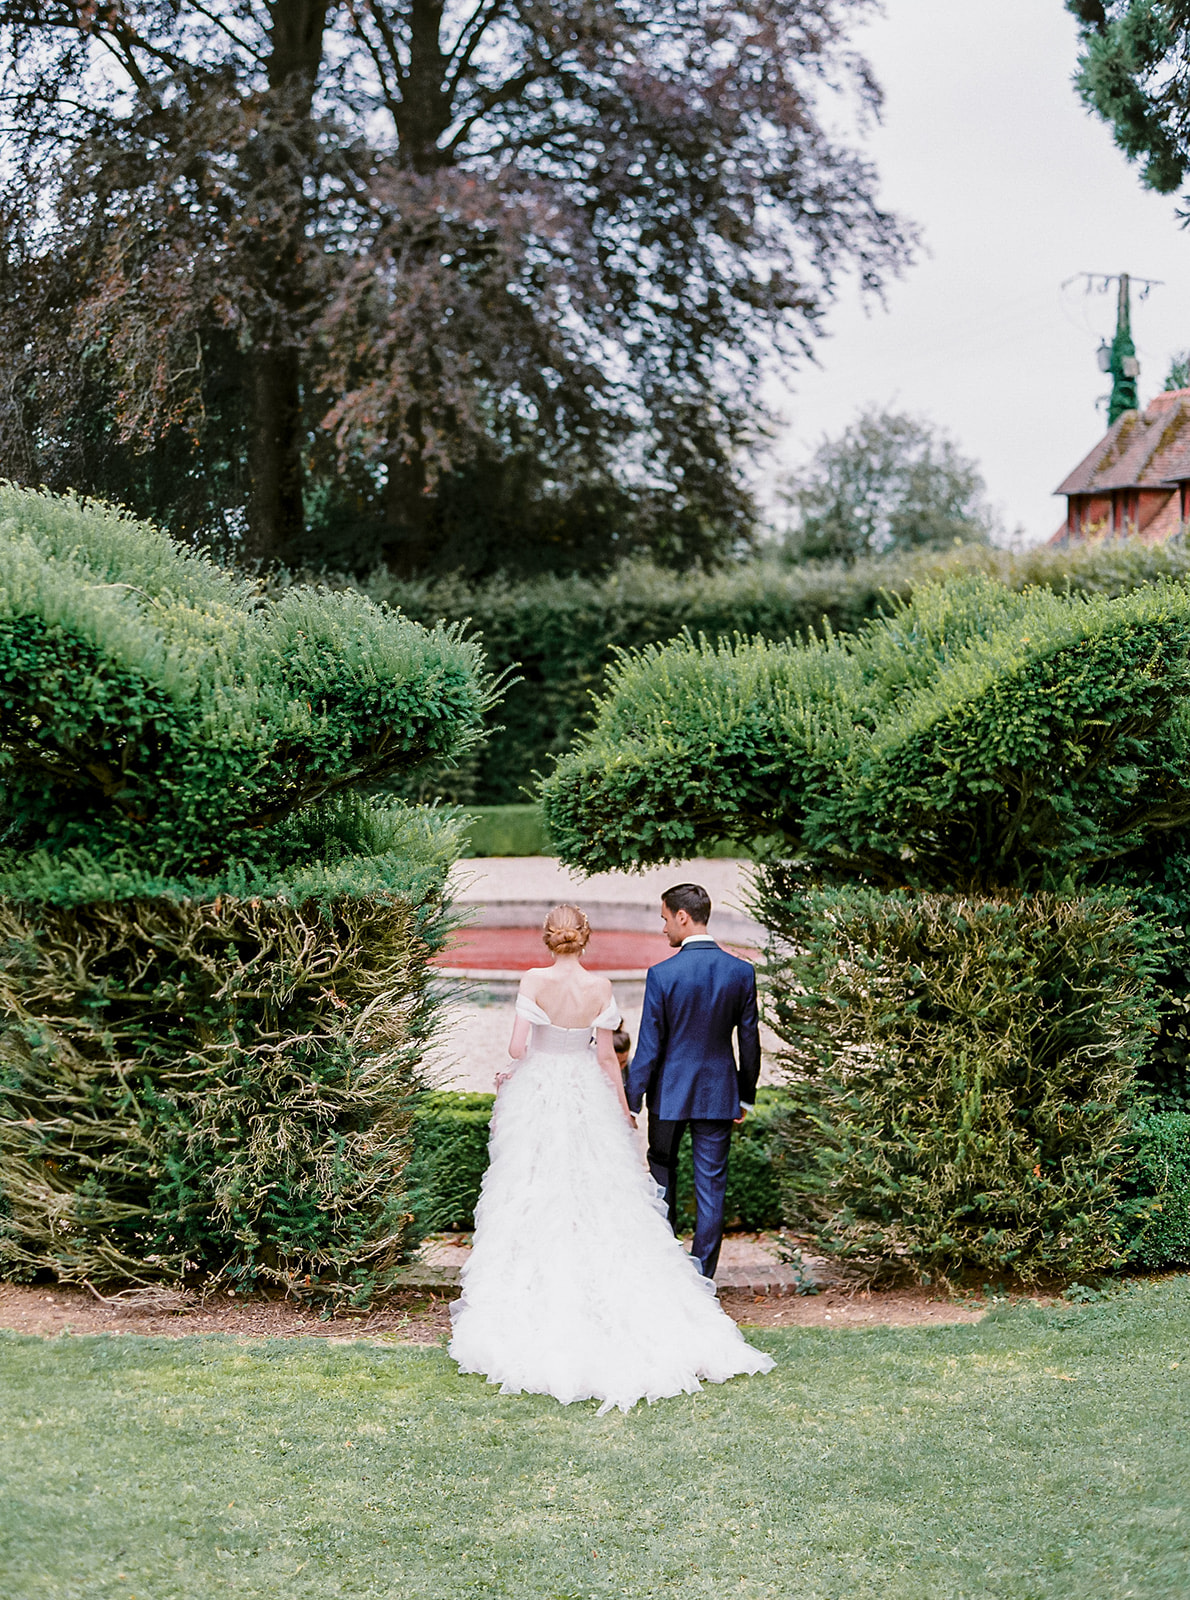 Elegant wedding at a Chateau in the north of France | Normandy Real ...